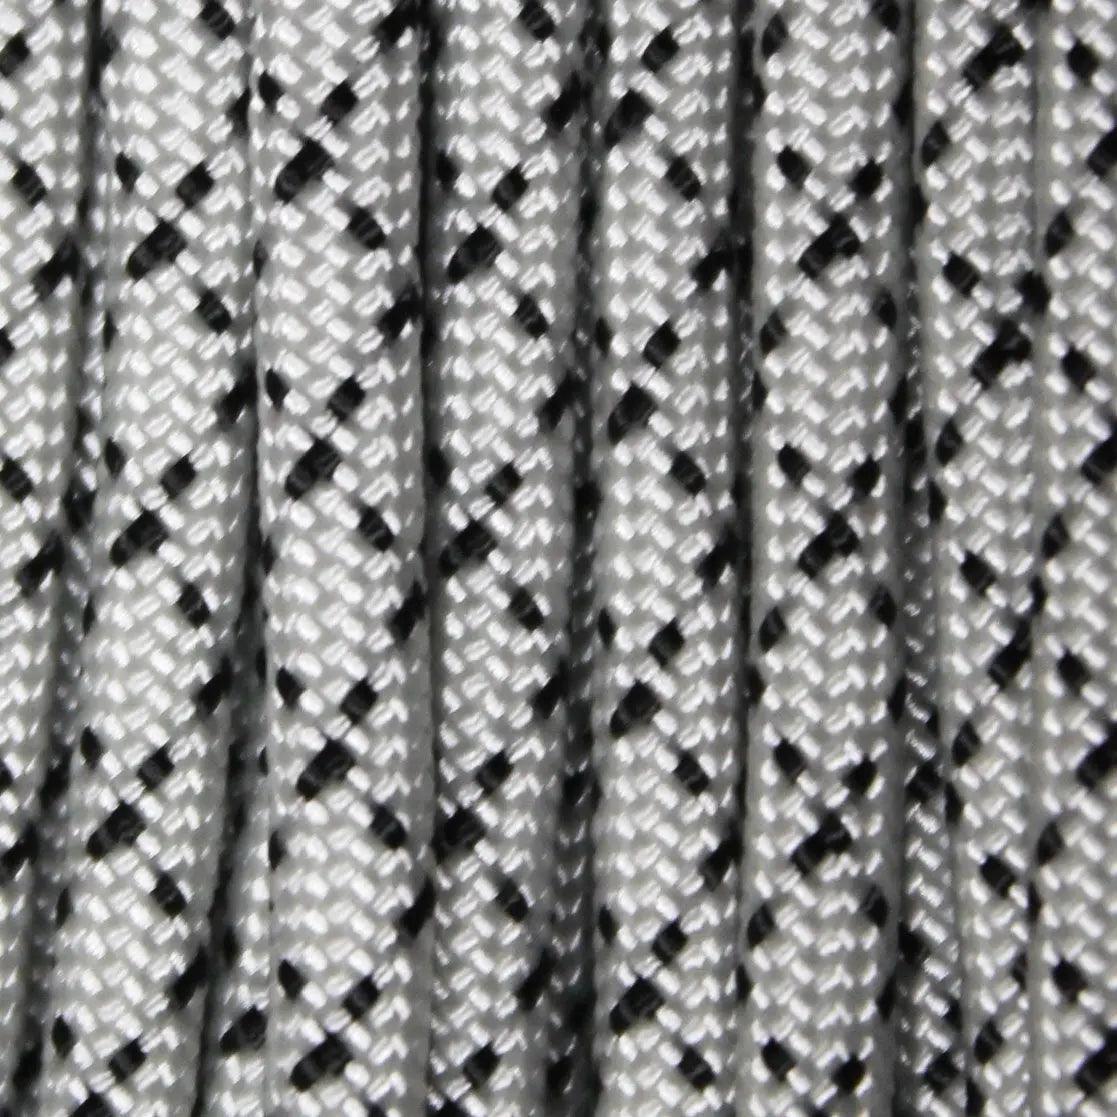 Starry Night-Silver with Black 550 Paracord Made in the USA (100 FT.)  163- nylon/nylon paracord